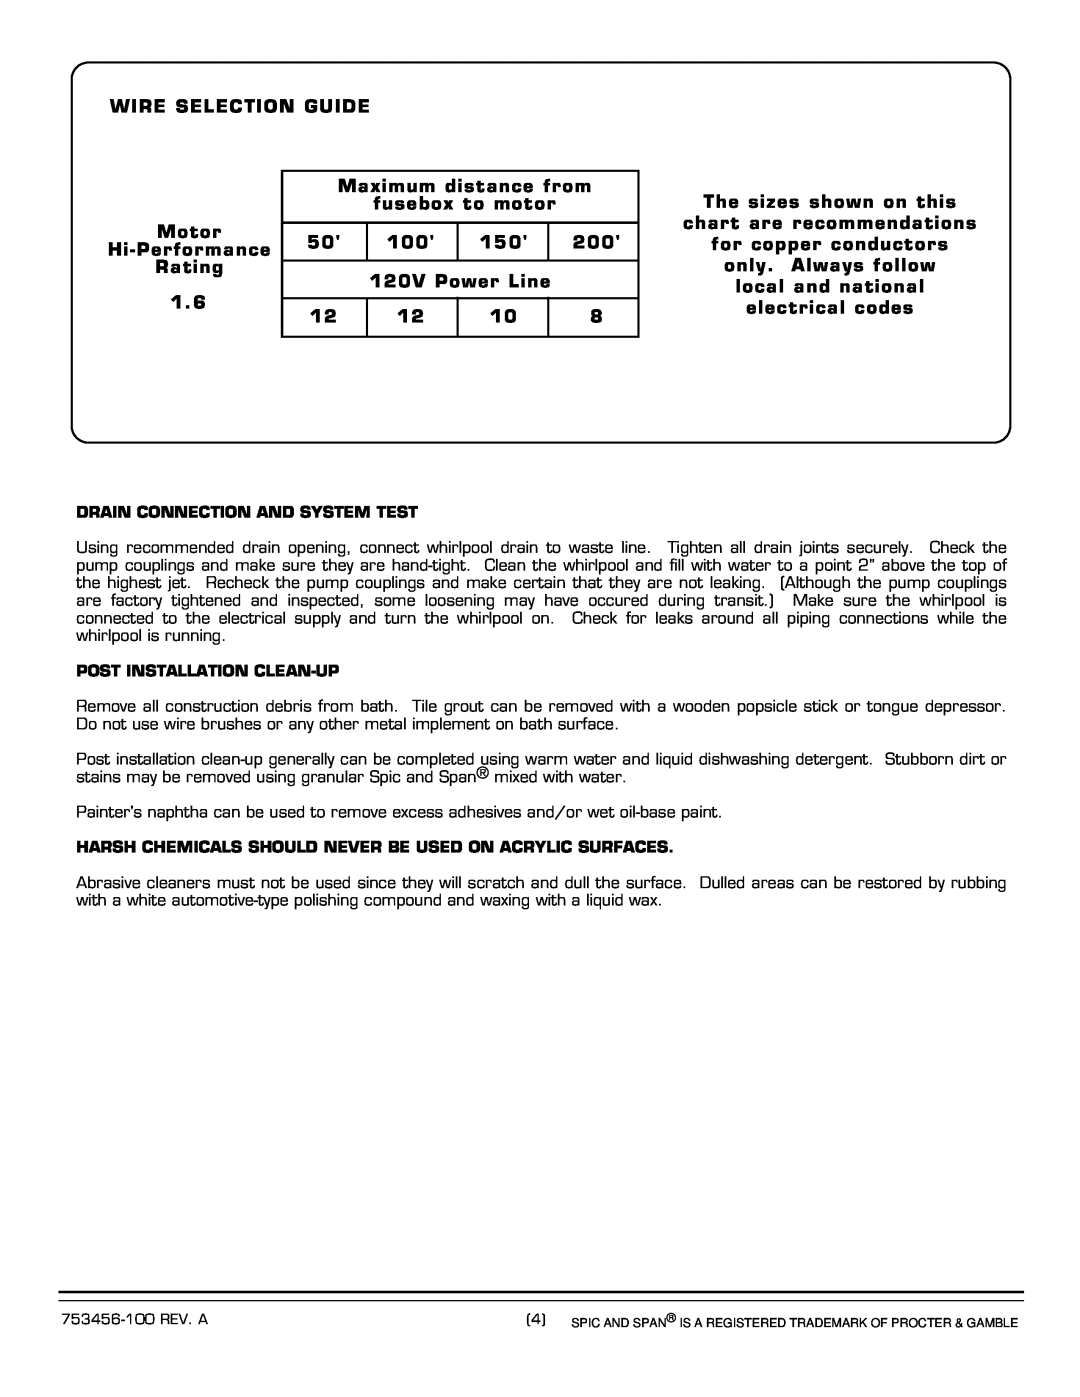 American Standard 2425.XXXW-RHO Wire Selection Guide, Maximum distance from, fusebox to motor, Motor, Hi-Performance 